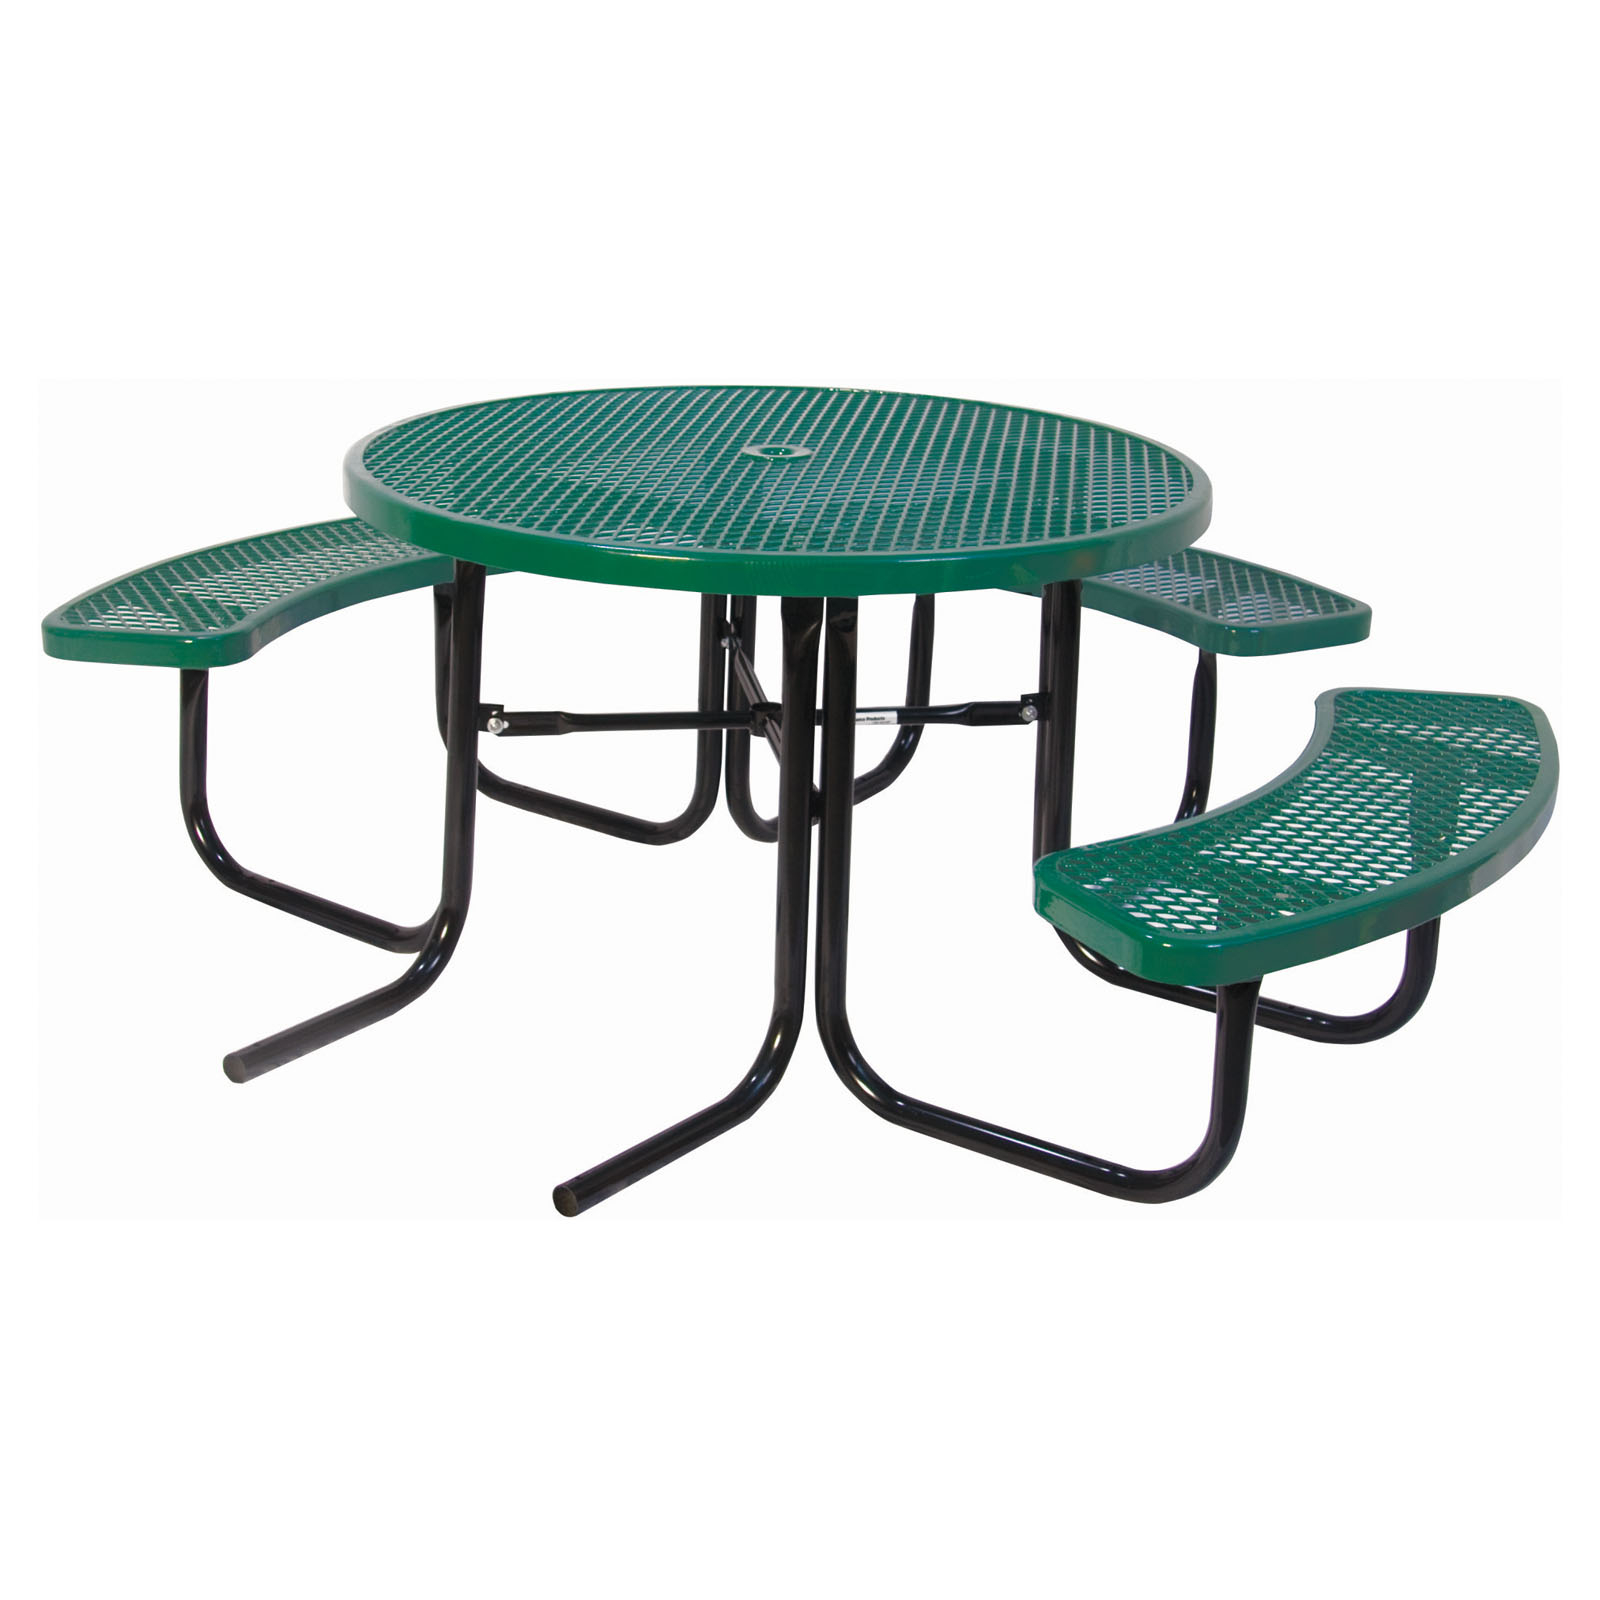 UltraPlay 358H-RDV Round 3-Bench Expanded Metal Outdoor Picnic Table